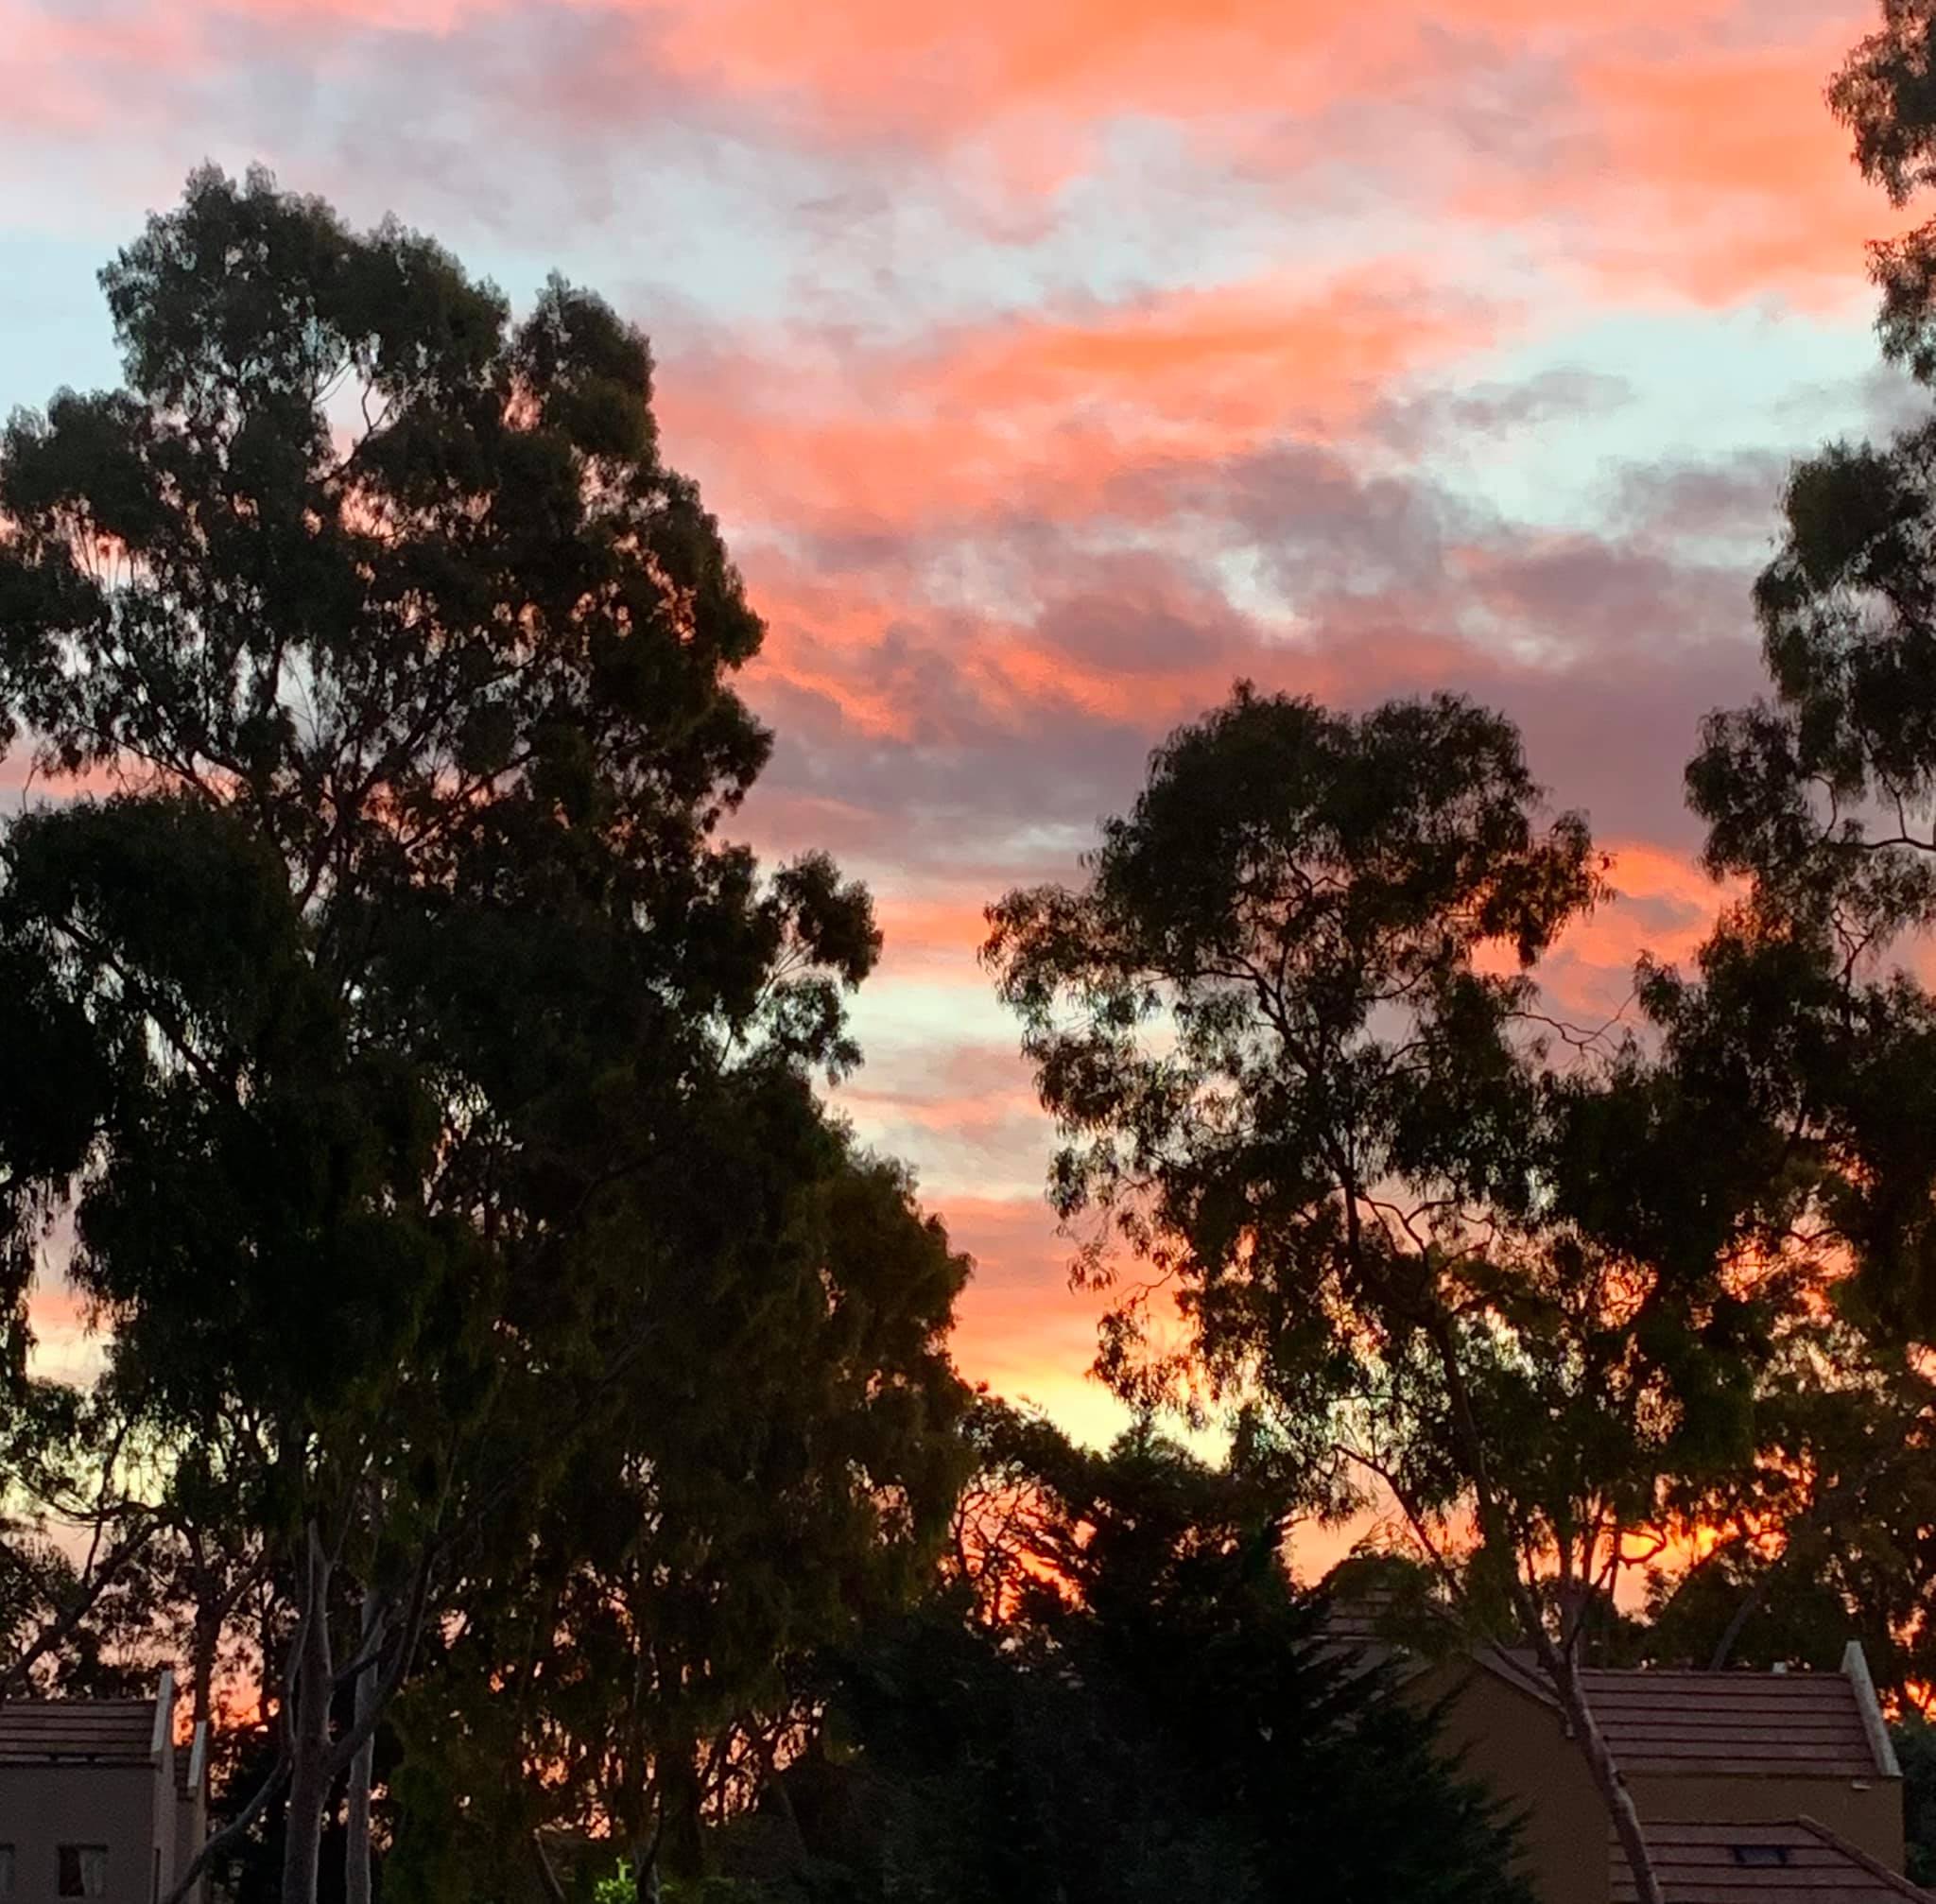 The first beautiful sunrise of 2021, as seen from my bedroom window early this morning